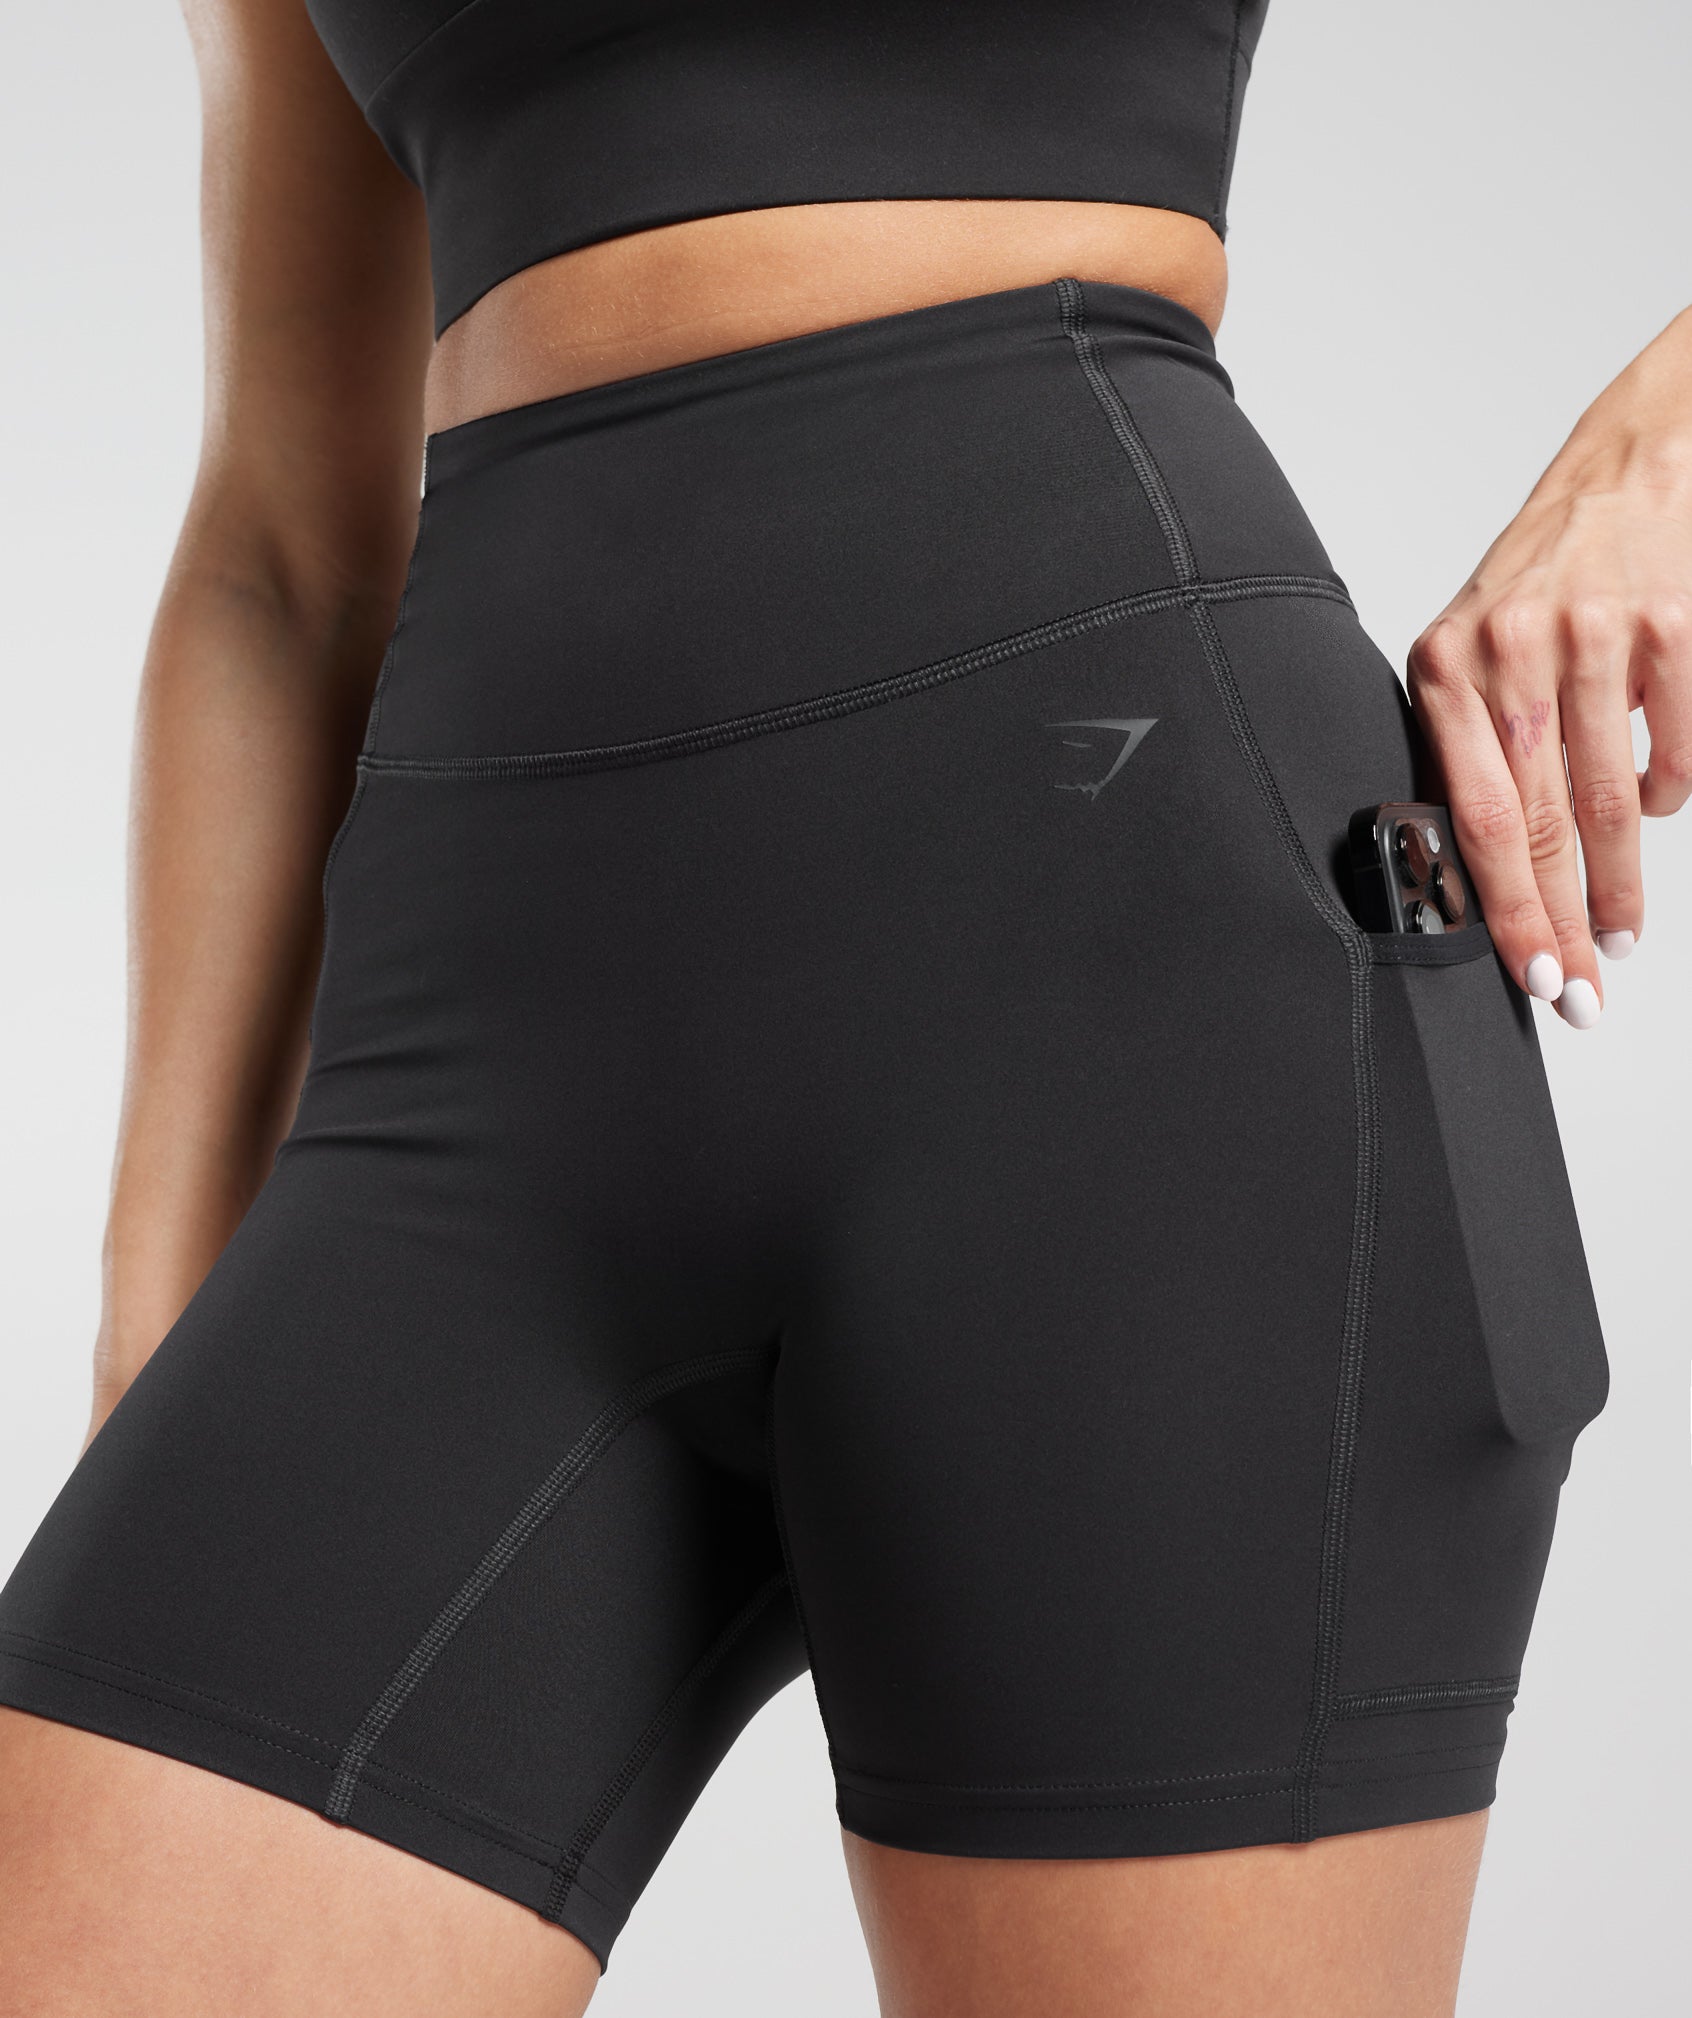 Pocket Shorts in Black - view 5